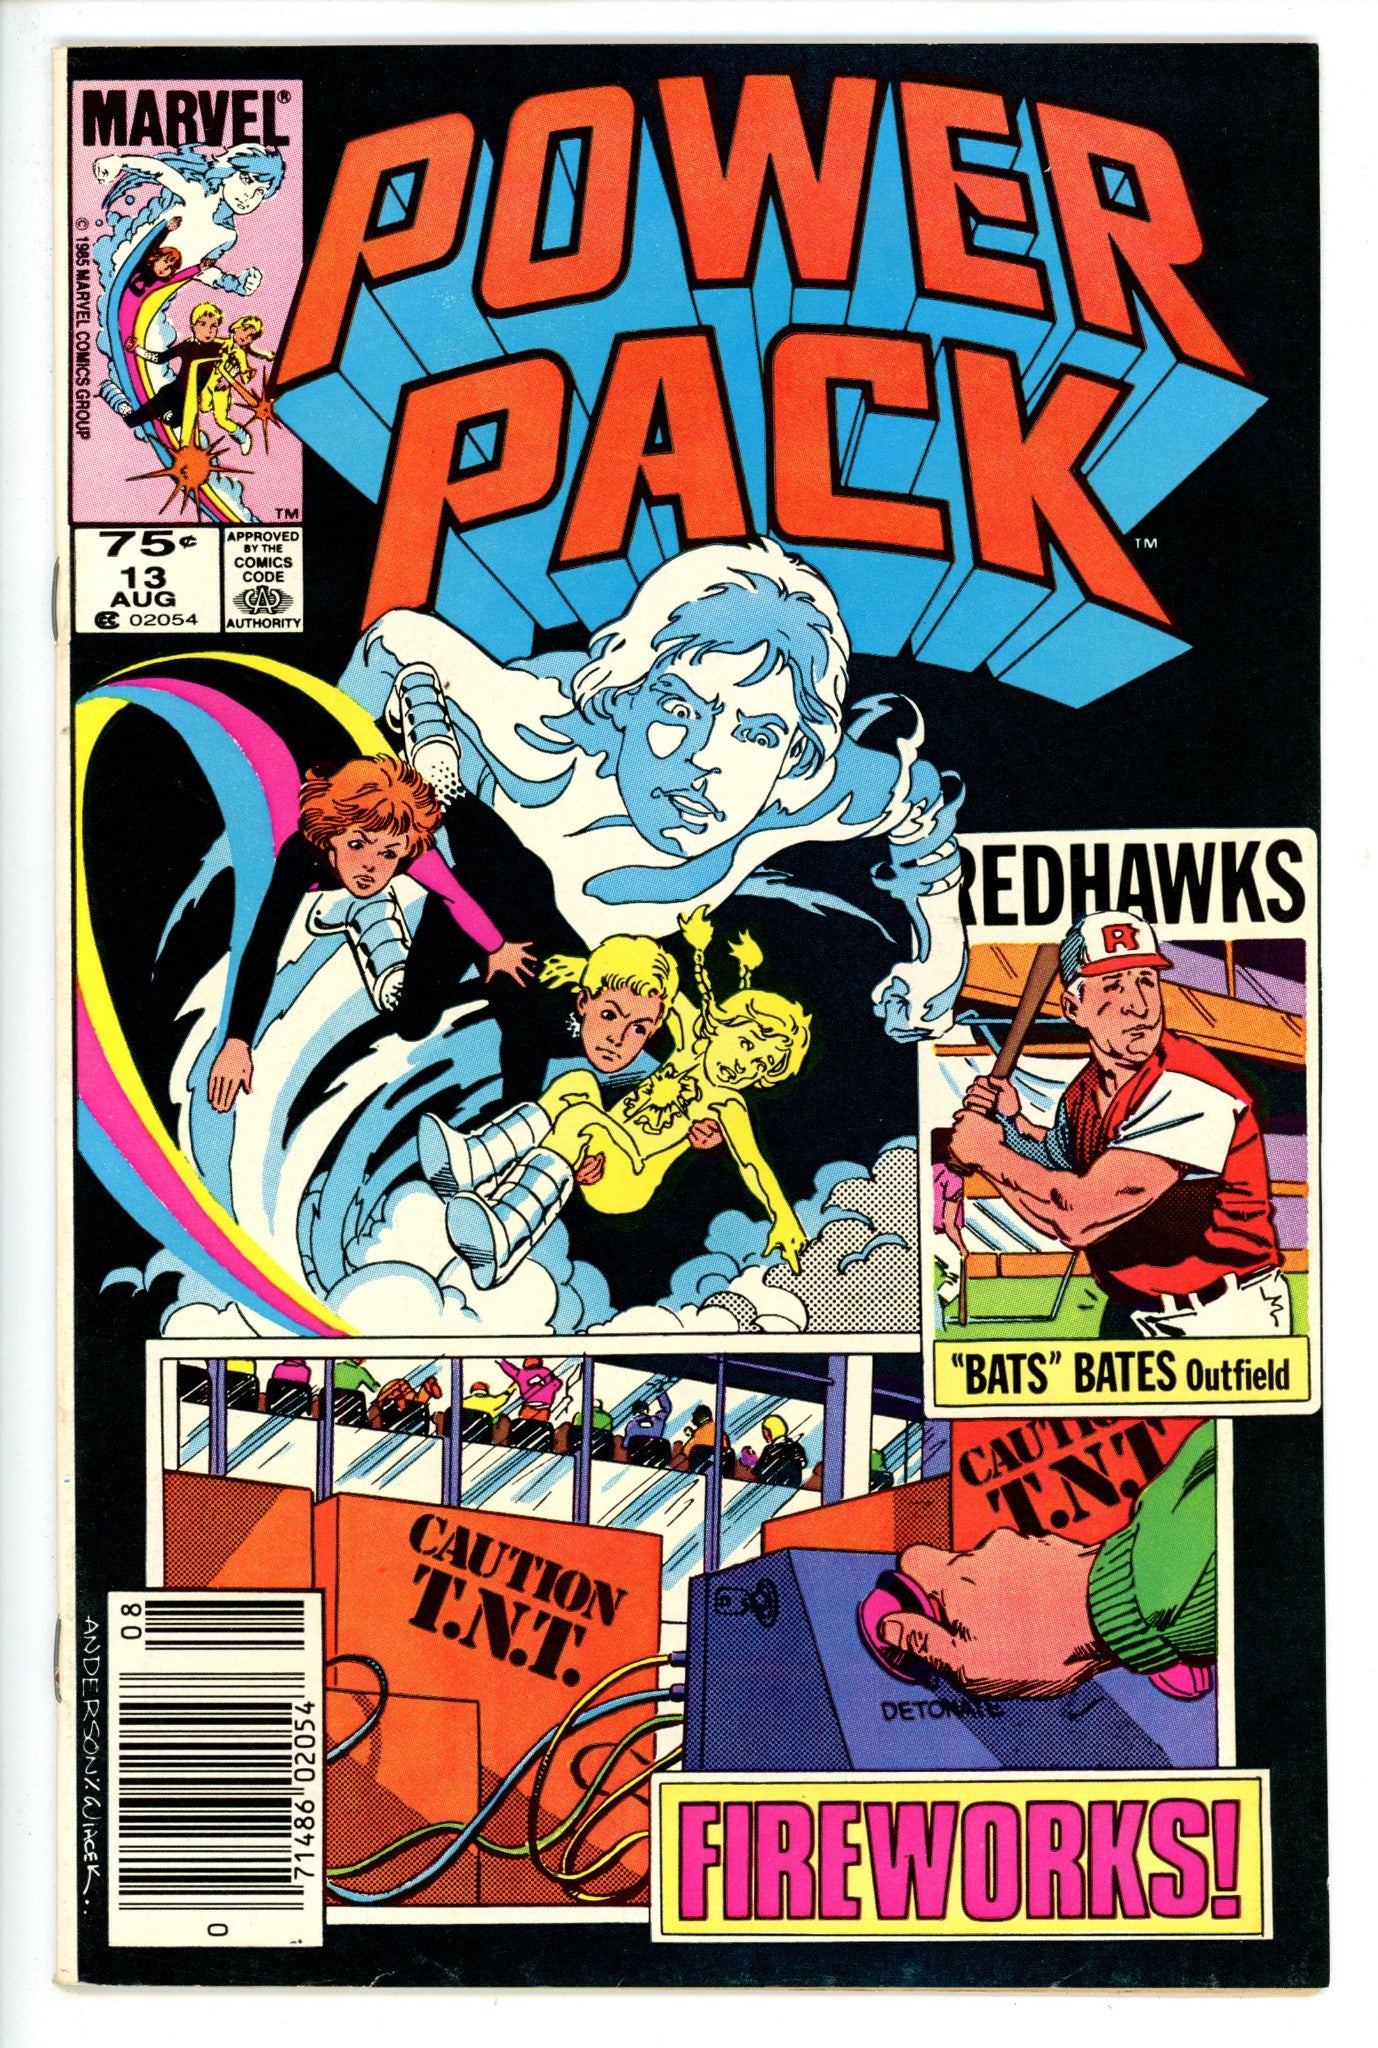 Power Pack Vol 1 13 Canadian VF-